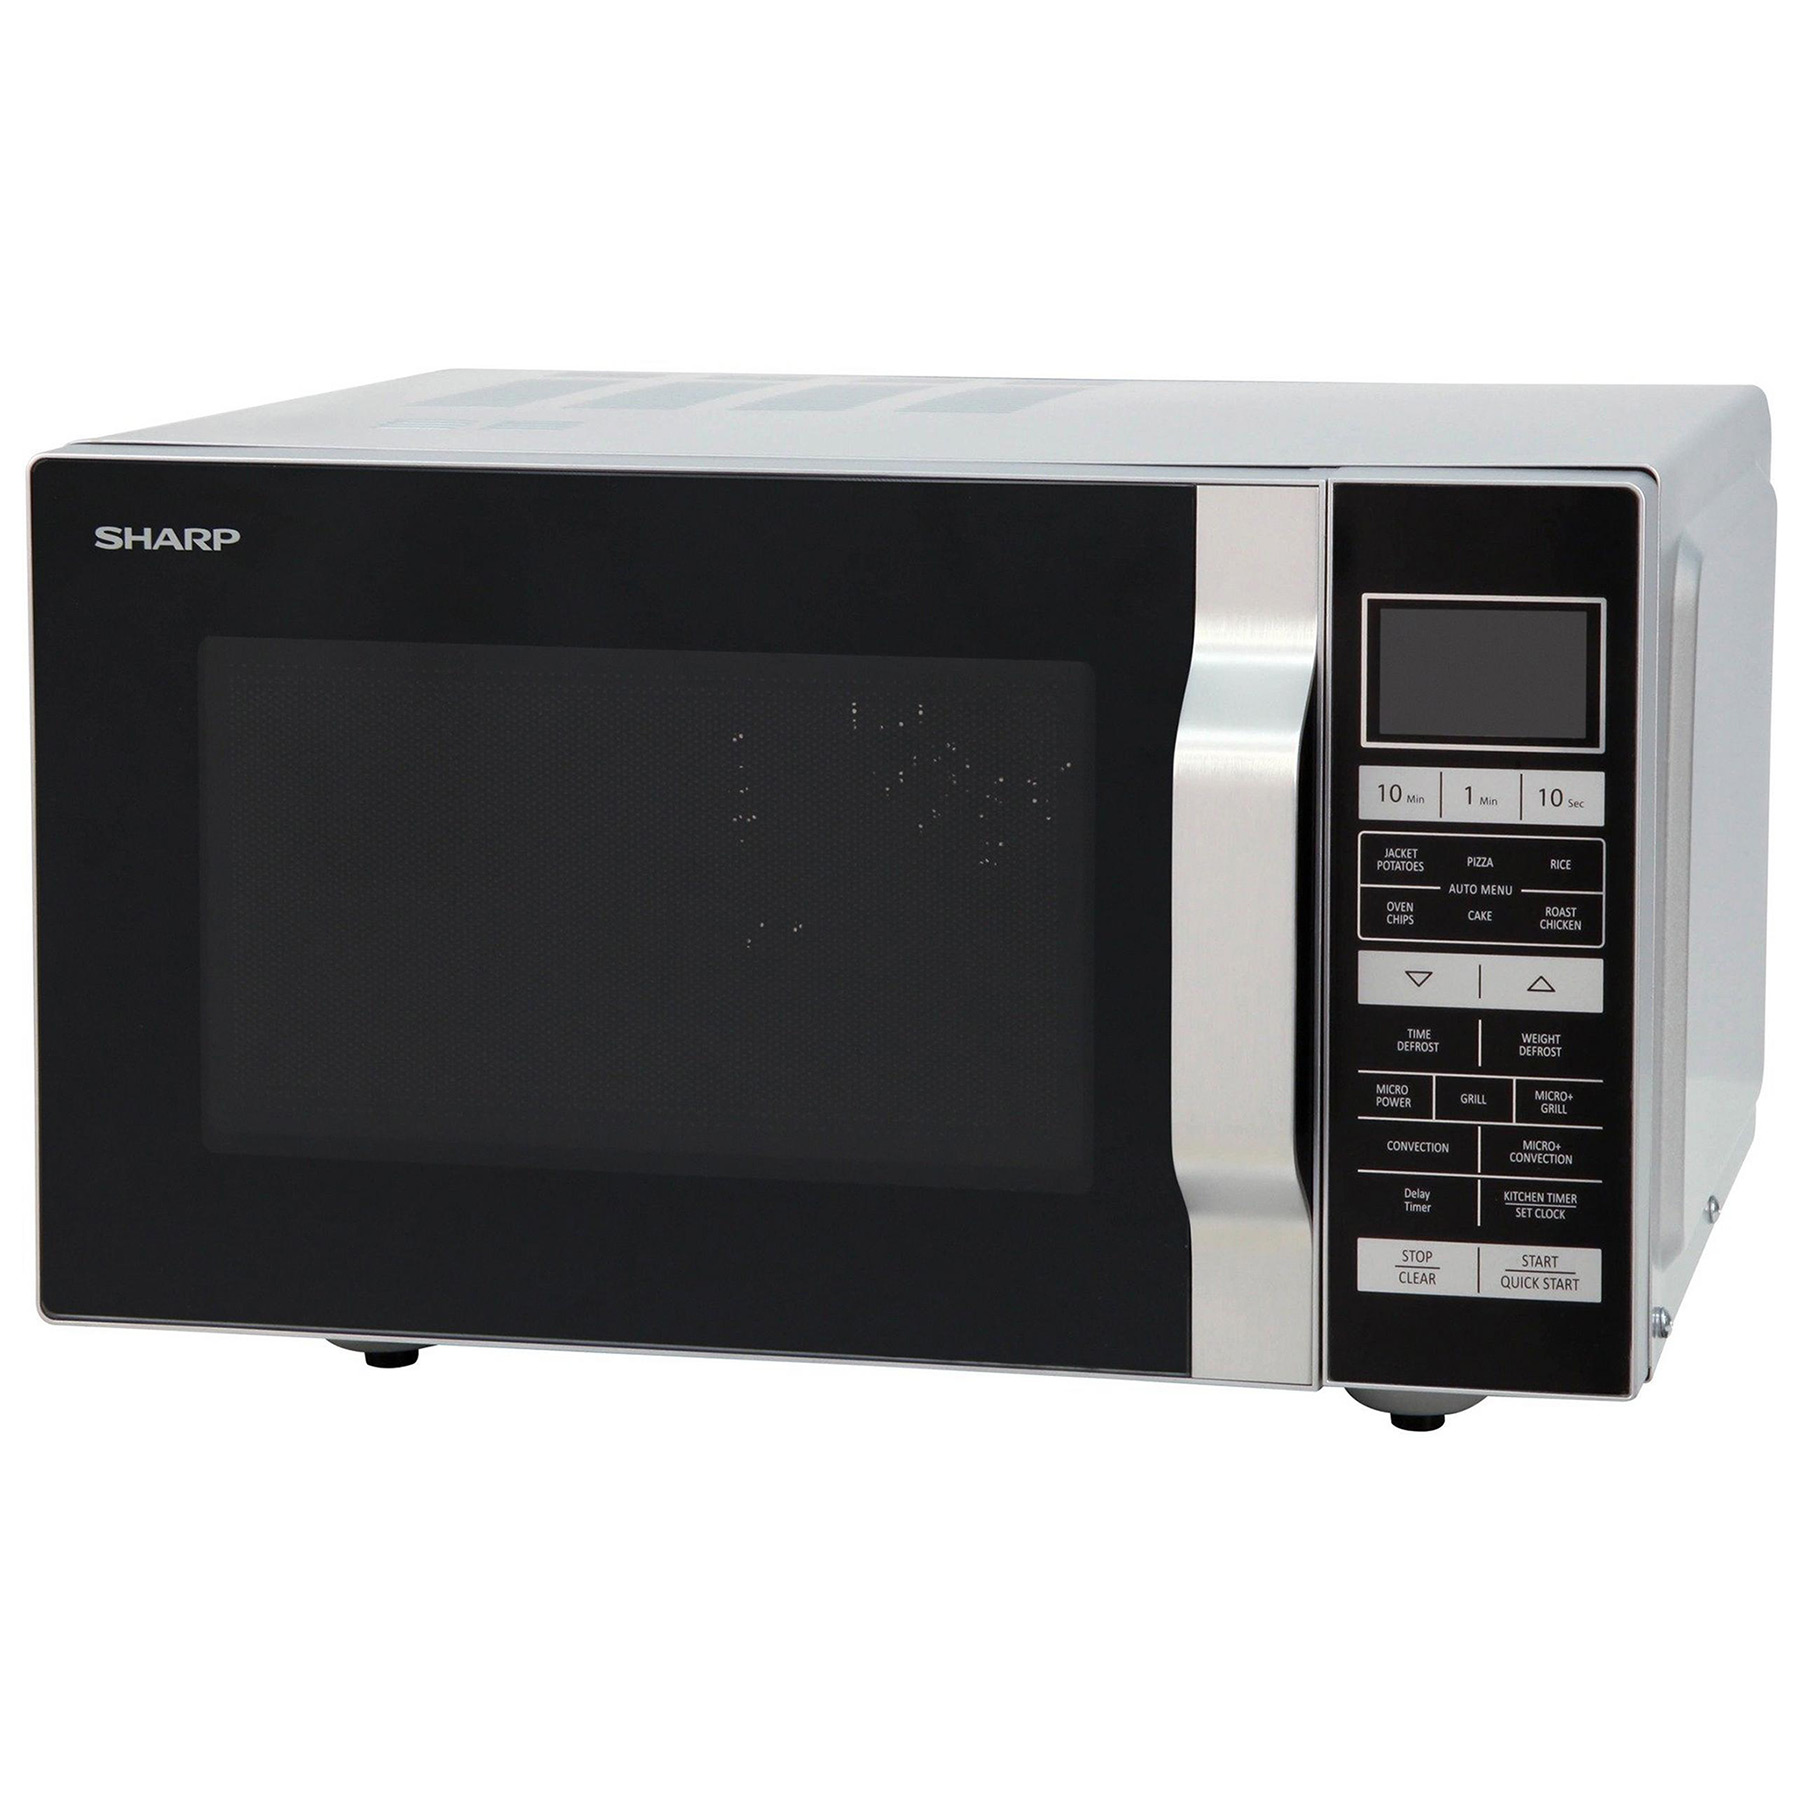 Image of Sharp R860SLM Combination Microwave Oven in Silver 25L 900W 15 Prog